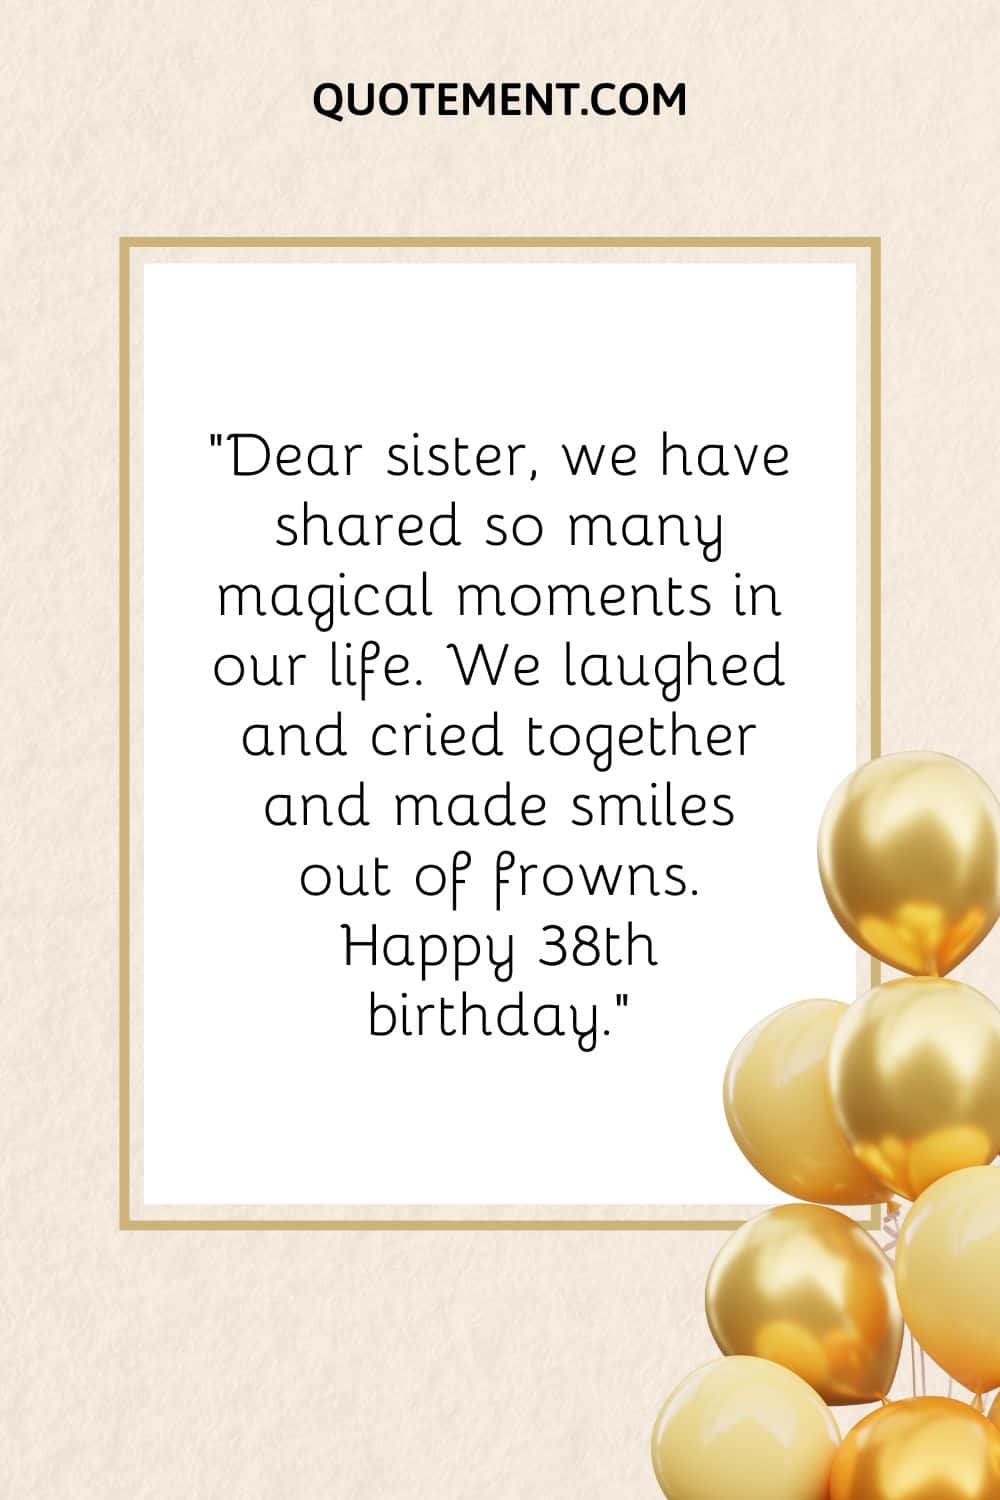 Dear sister, we have shared so many magical moments in our life